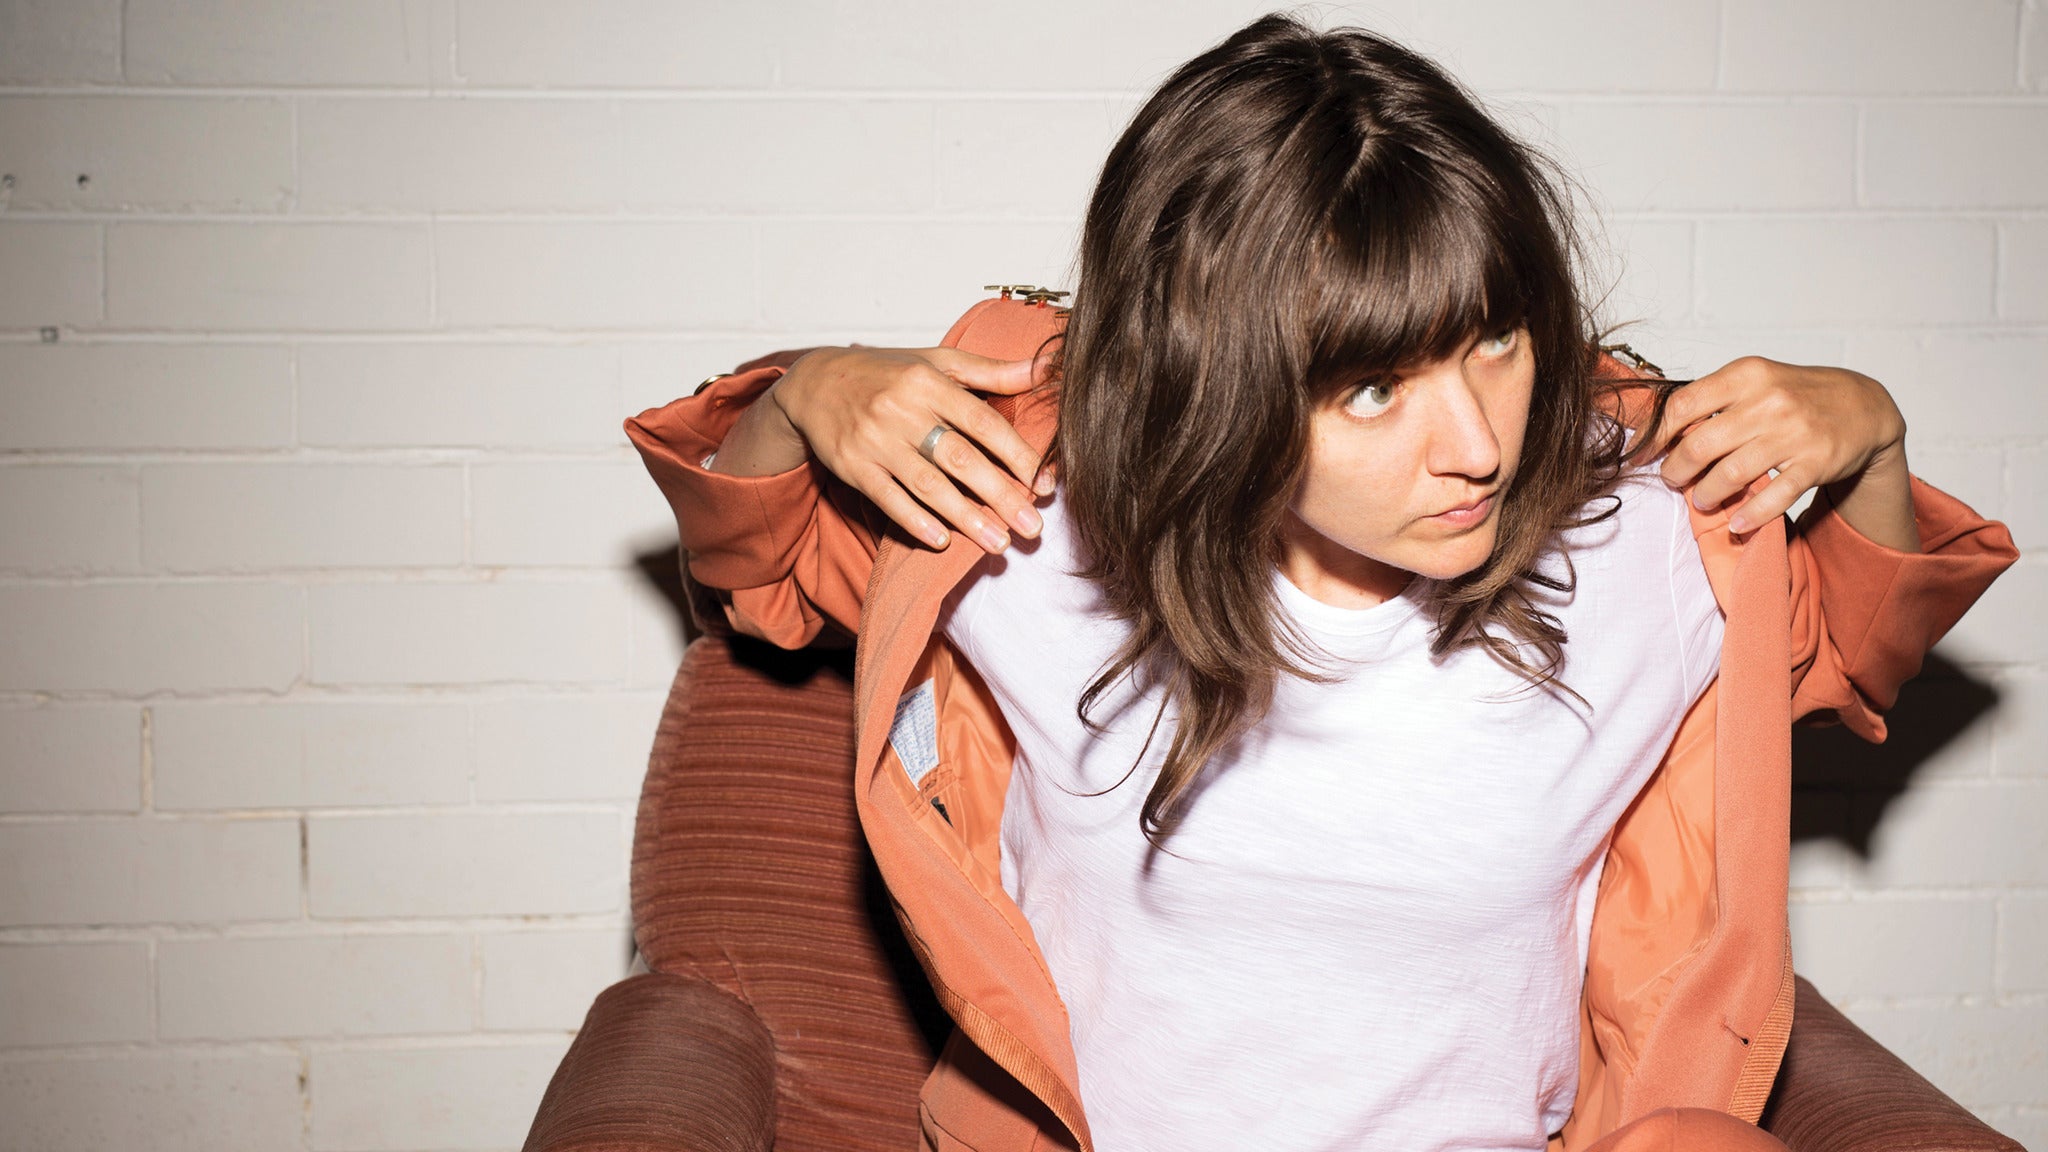 Courtney Barnett (Solo) with Hachiku in Wilmington promo photo for Live Nation presale offer code